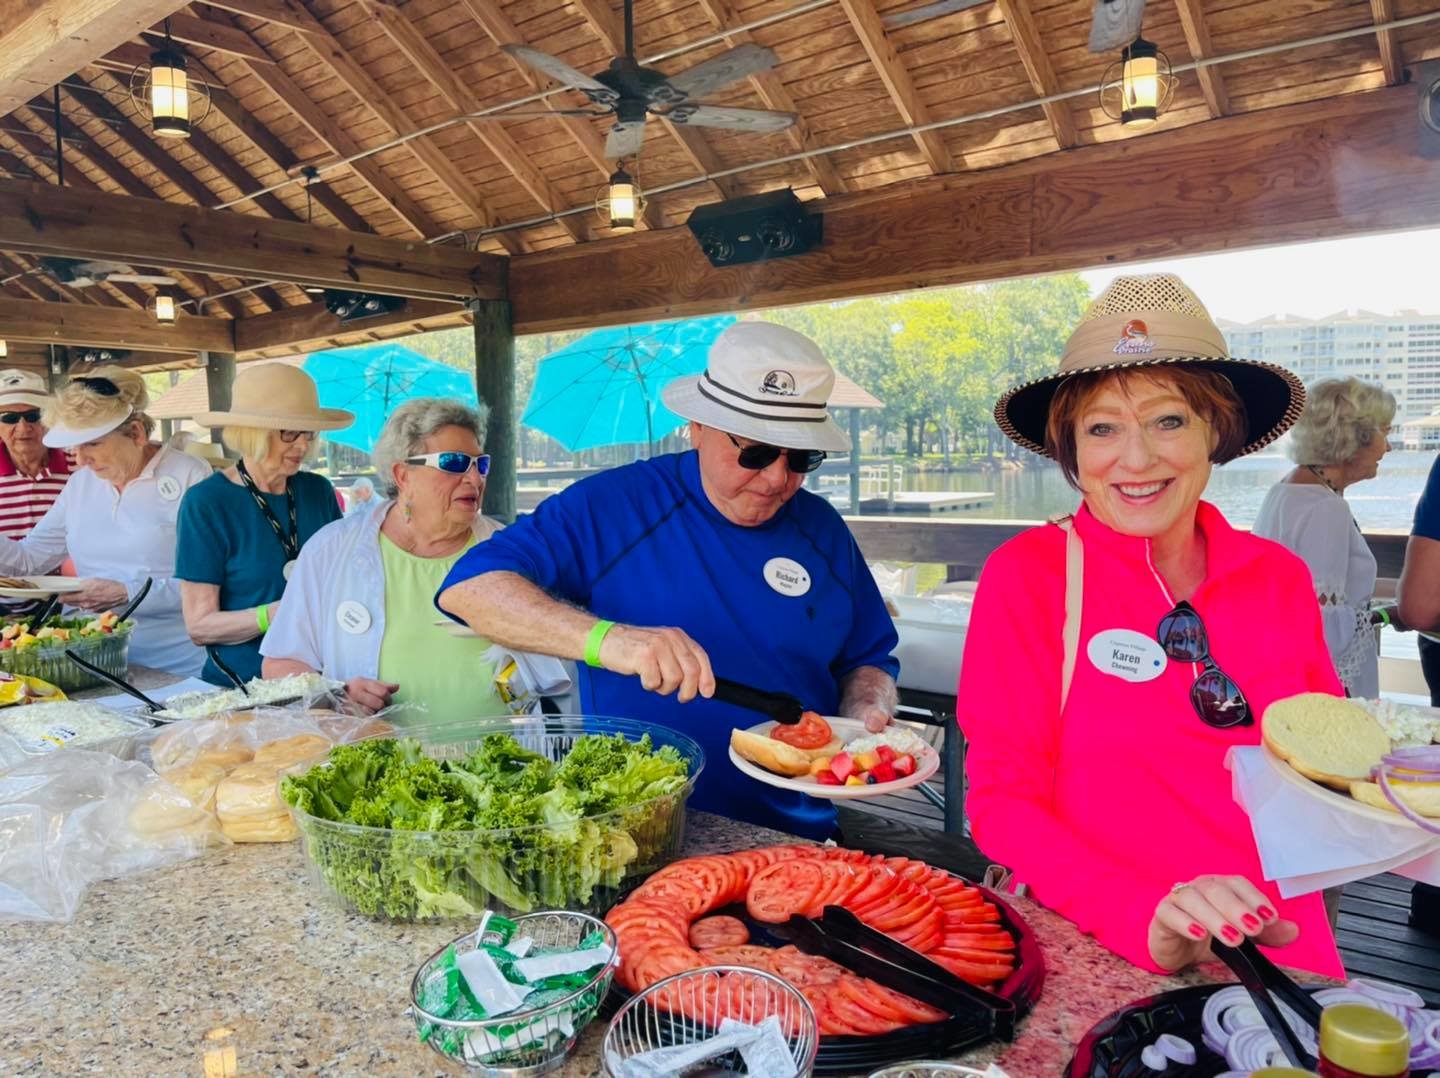 Cypress Village resident enjoy the cookout at the putting tournament.